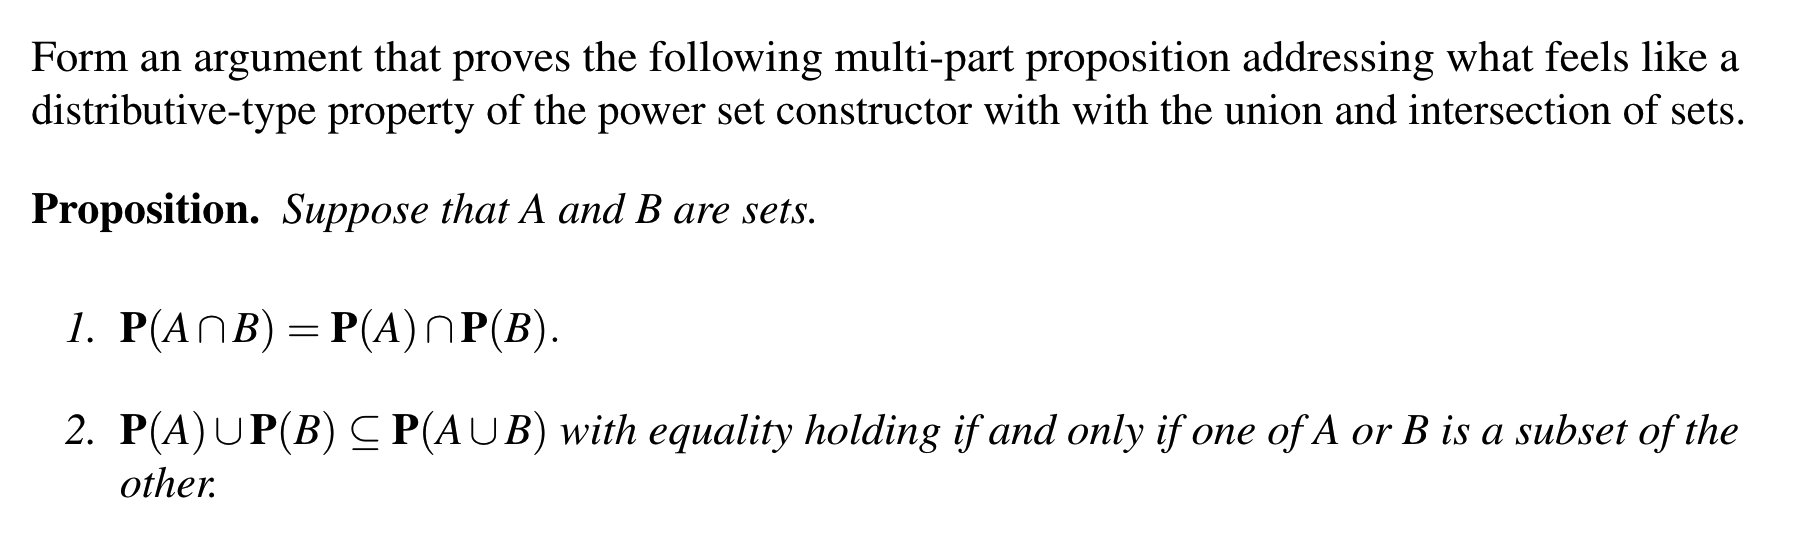 Proposition. Suppose that A and B are sets.
1. Р(ANB) 3D Р(A)ПР(В).
2. P(A)UP(B)C P(AUB) with equality holding if and only if one of A or B is a subset of the
other.
